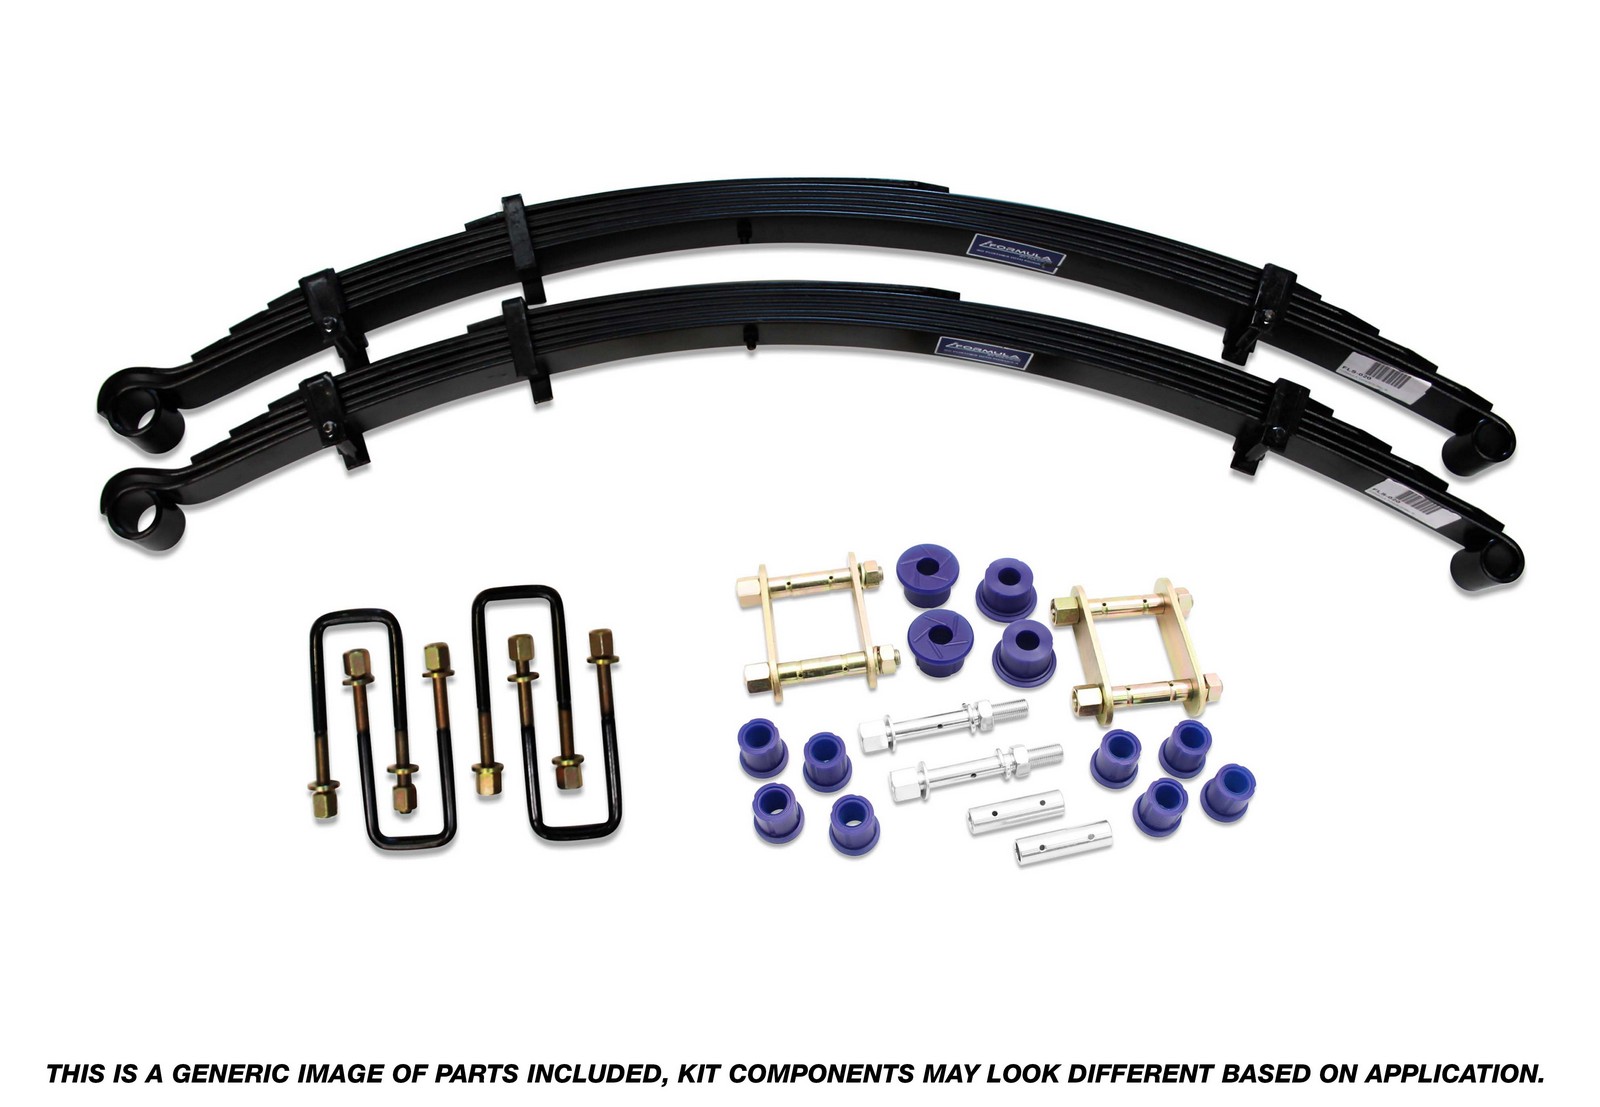 Formula Rear Leaf Spring Kit - 40mm Lift at 300kg to suit Jeep Cherokee XJ 1994 -2001